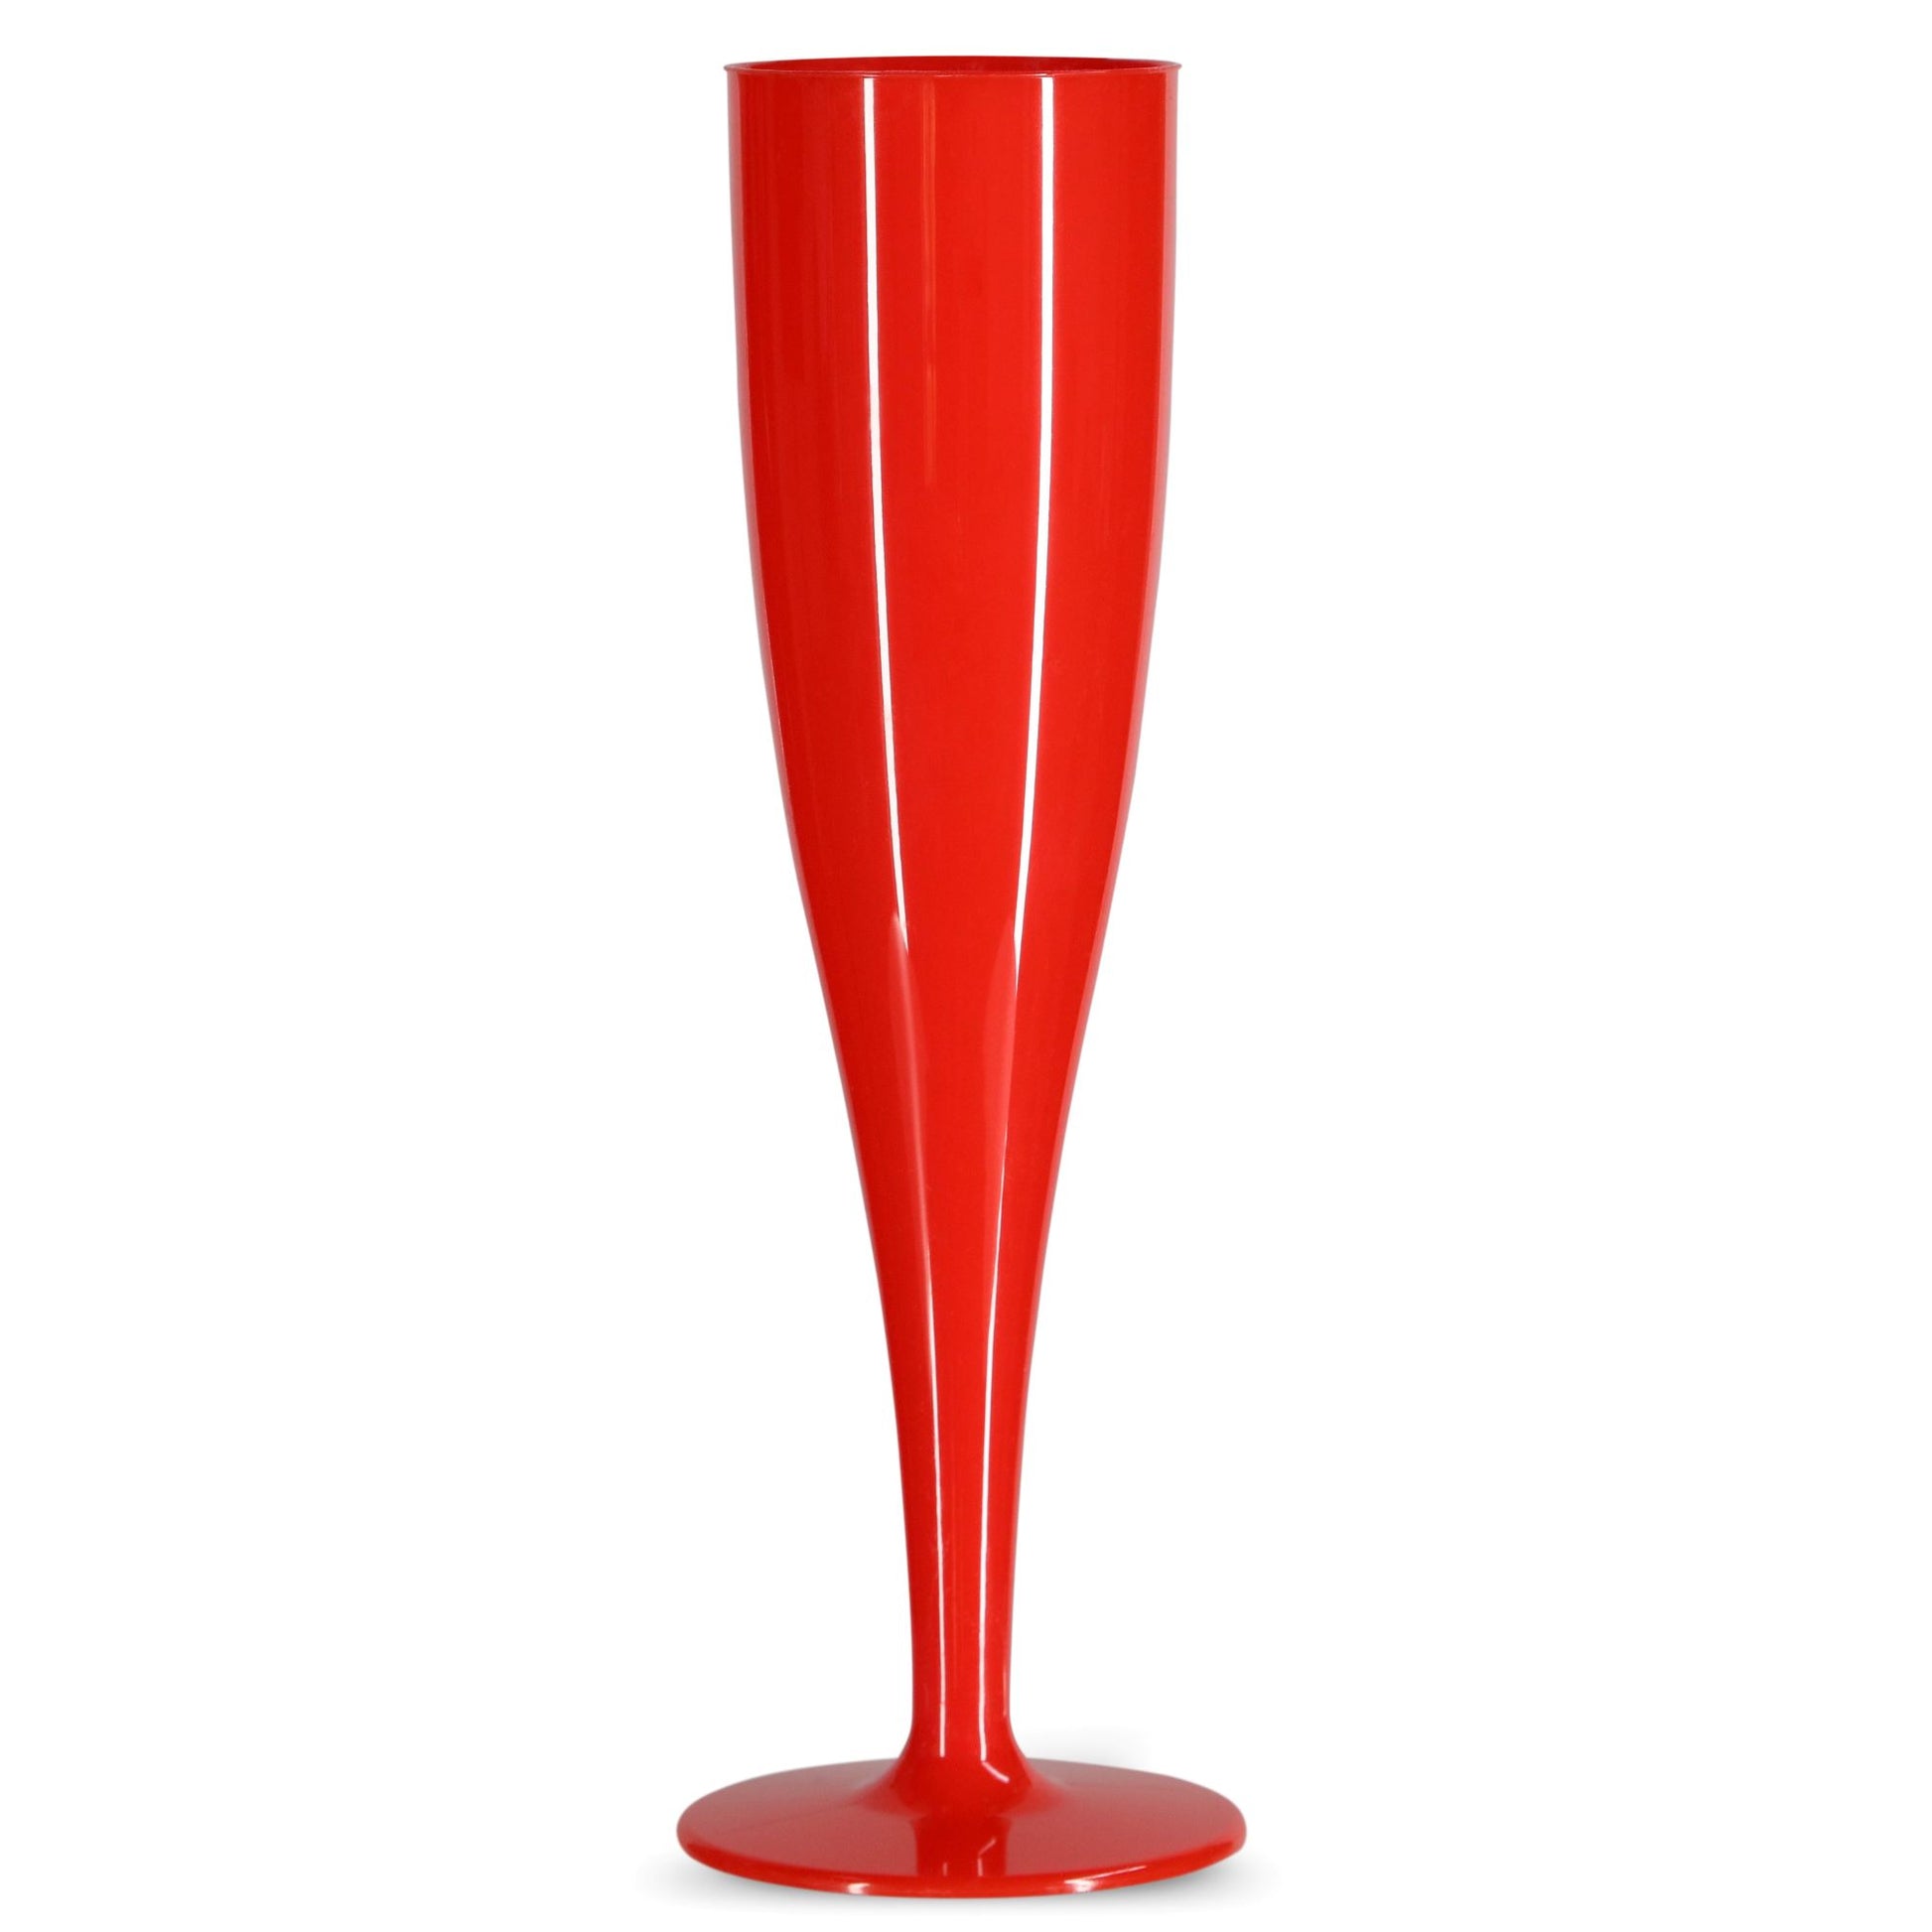 50 x Red Prosecco Flutes – Biodegradable Material in glossy Colour 1-Piece Champagne Glass (Pack of 50 Glasses) Halloween, Parties, BBQ-5056020187332-EY-PP-167-Product Pro-BBQ, Biodegradable, Champagne Flutes, Champagne Glasses, Flutes, Garden, Picnic, Prosecco Flutes, Prosecco Glasses, Red, Red Champagne Glasses, Red Prosecco Flutes, Wedding